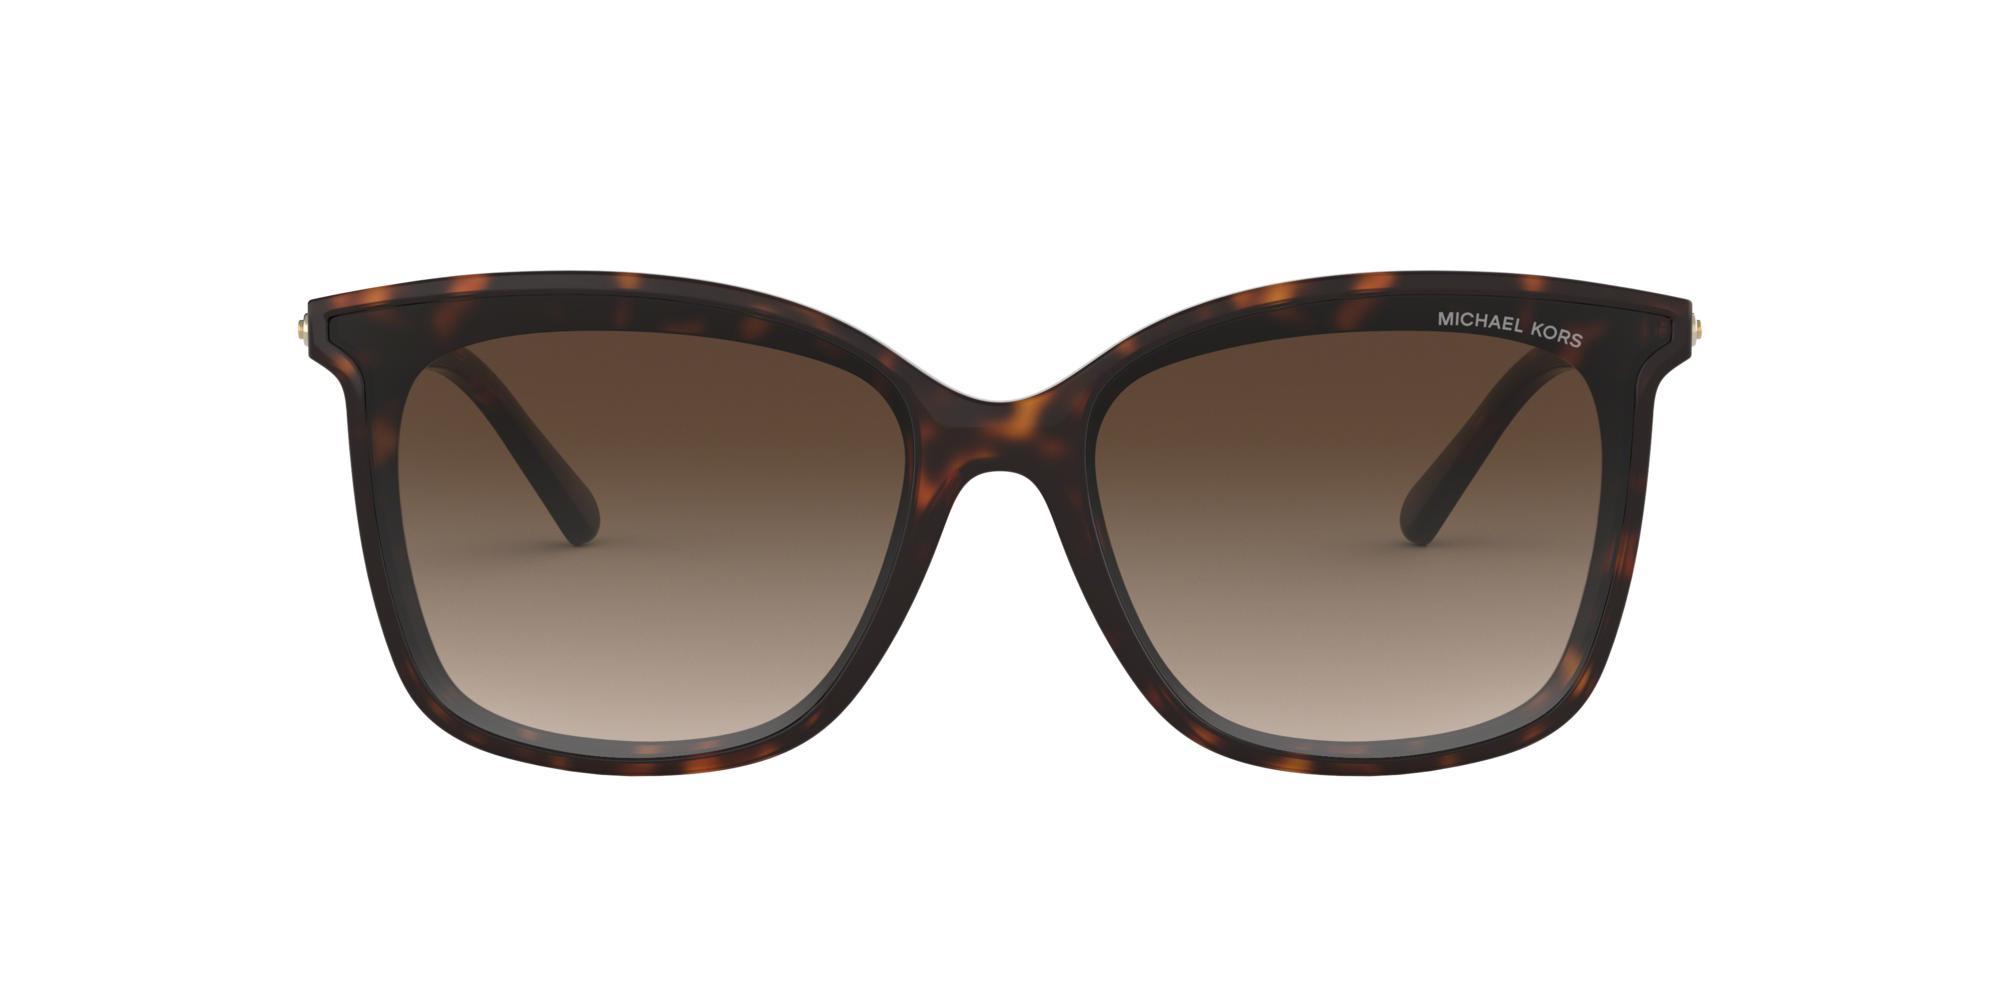 Tory Burch 58mm Square Sunglasses Product Image